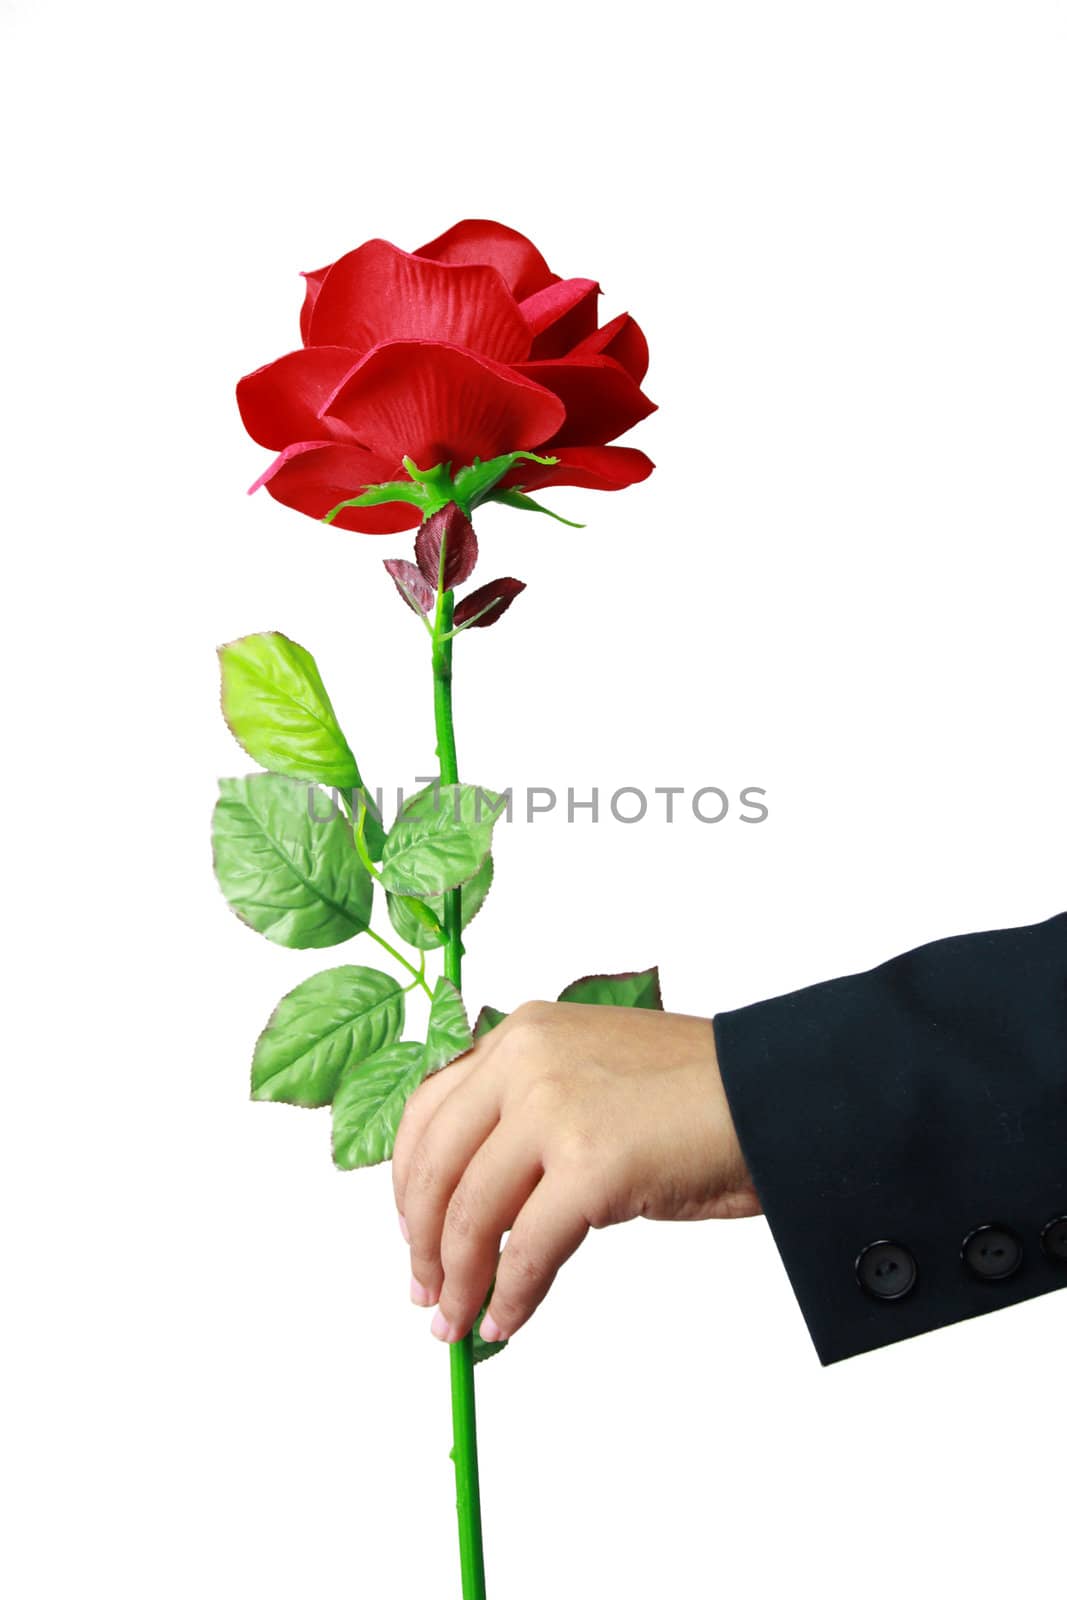 Red rose in hand isolated on white background by bajita111122